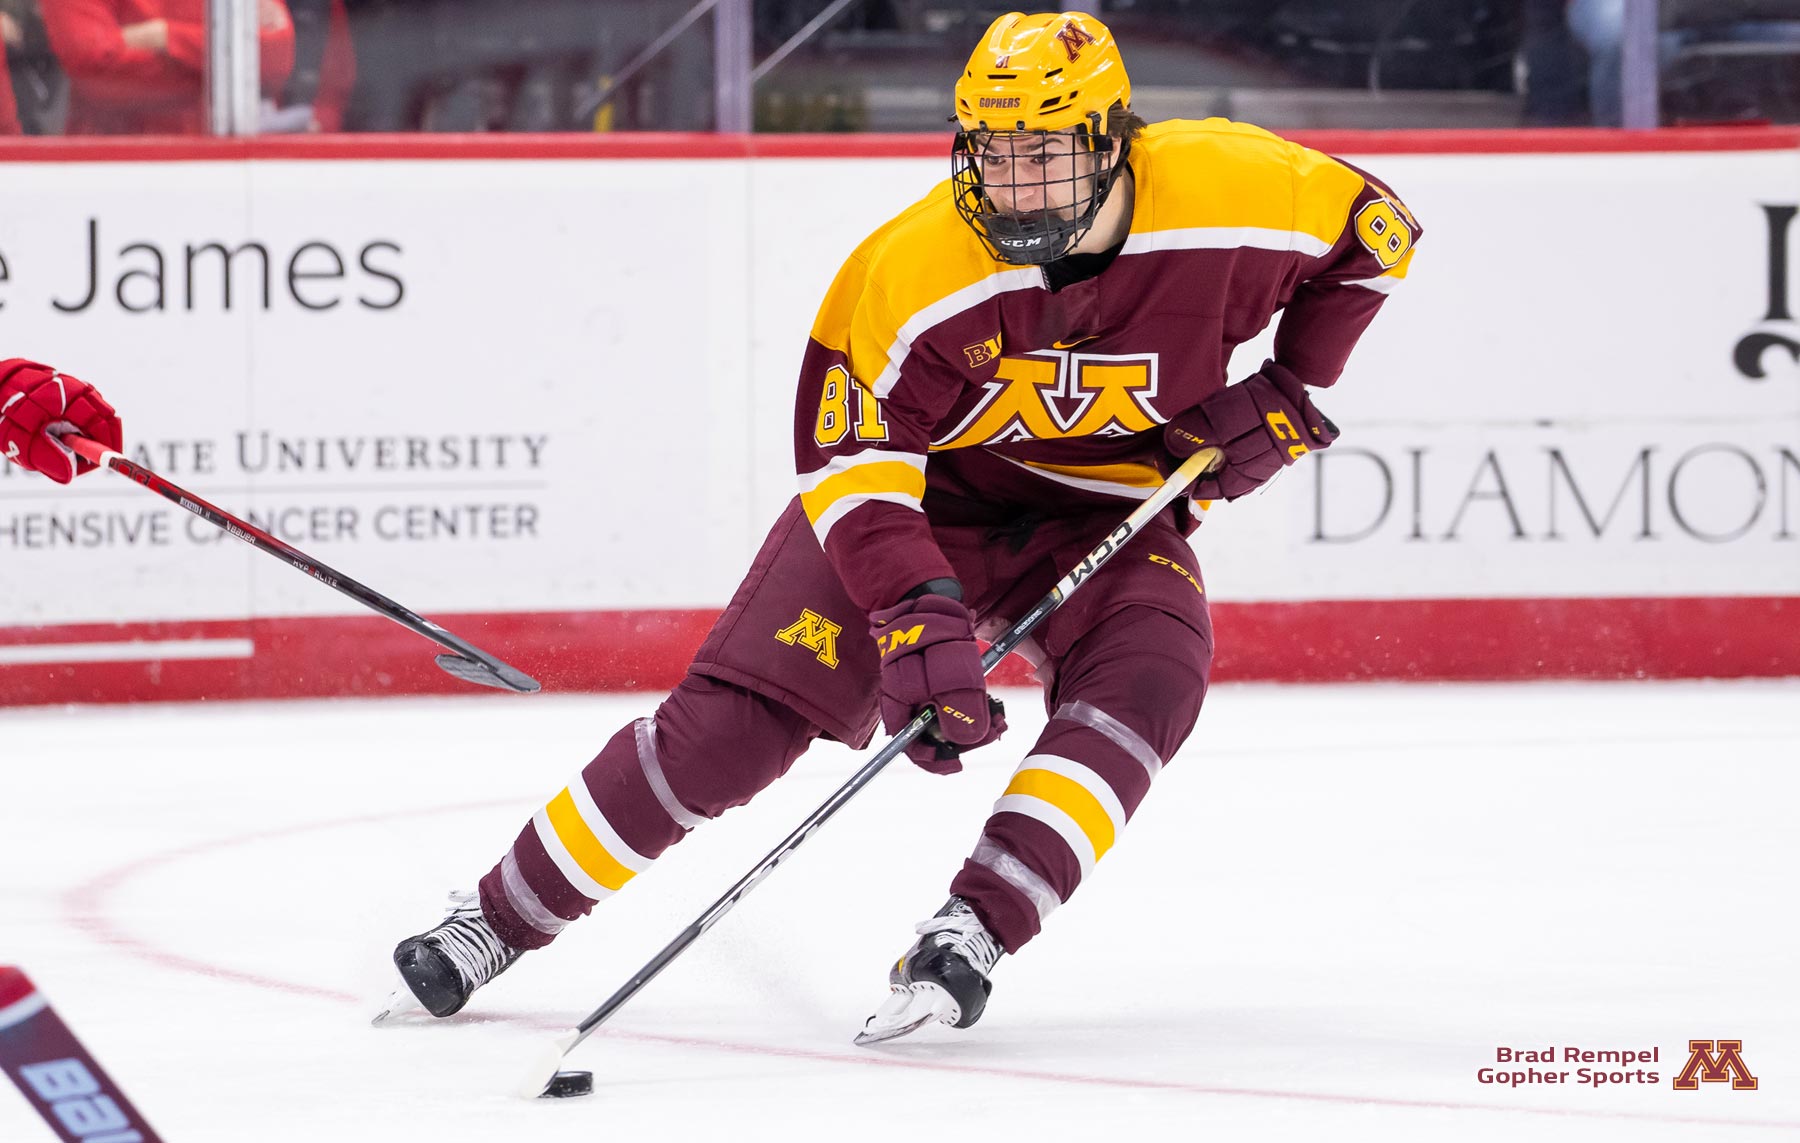 Jimmy Snuggerud with 2 goals. Photo by Brad Rempel, Gopher Sports